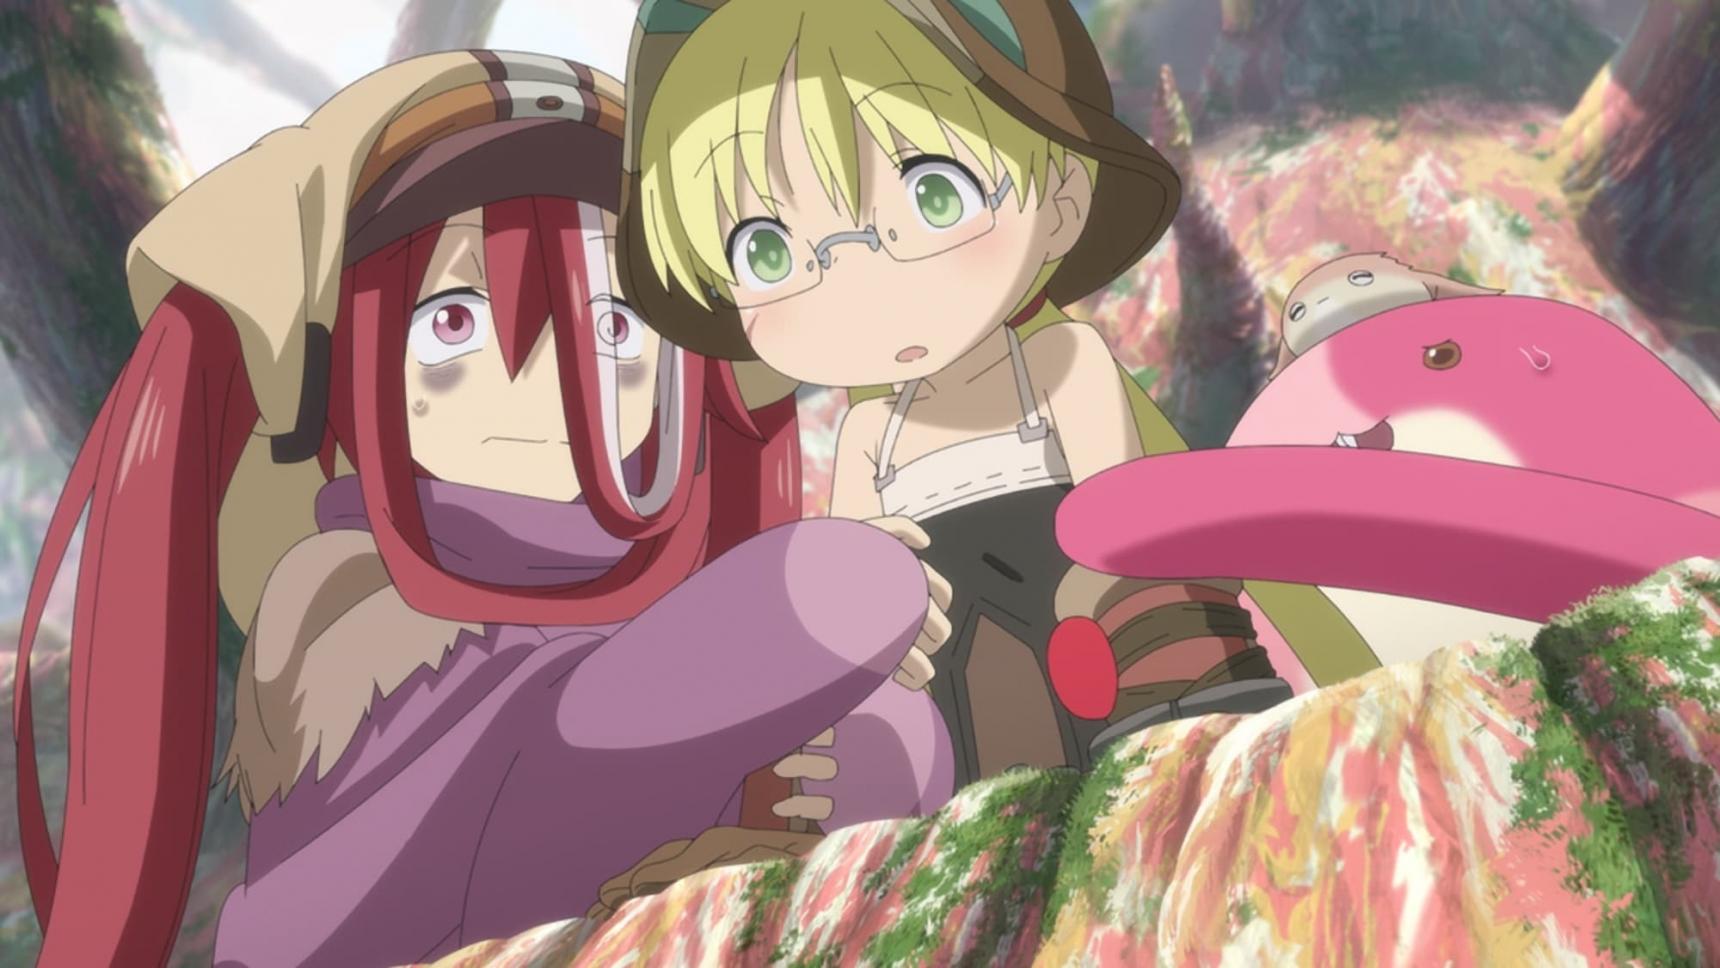 Poster del episodio 6 de Made in Abyss online